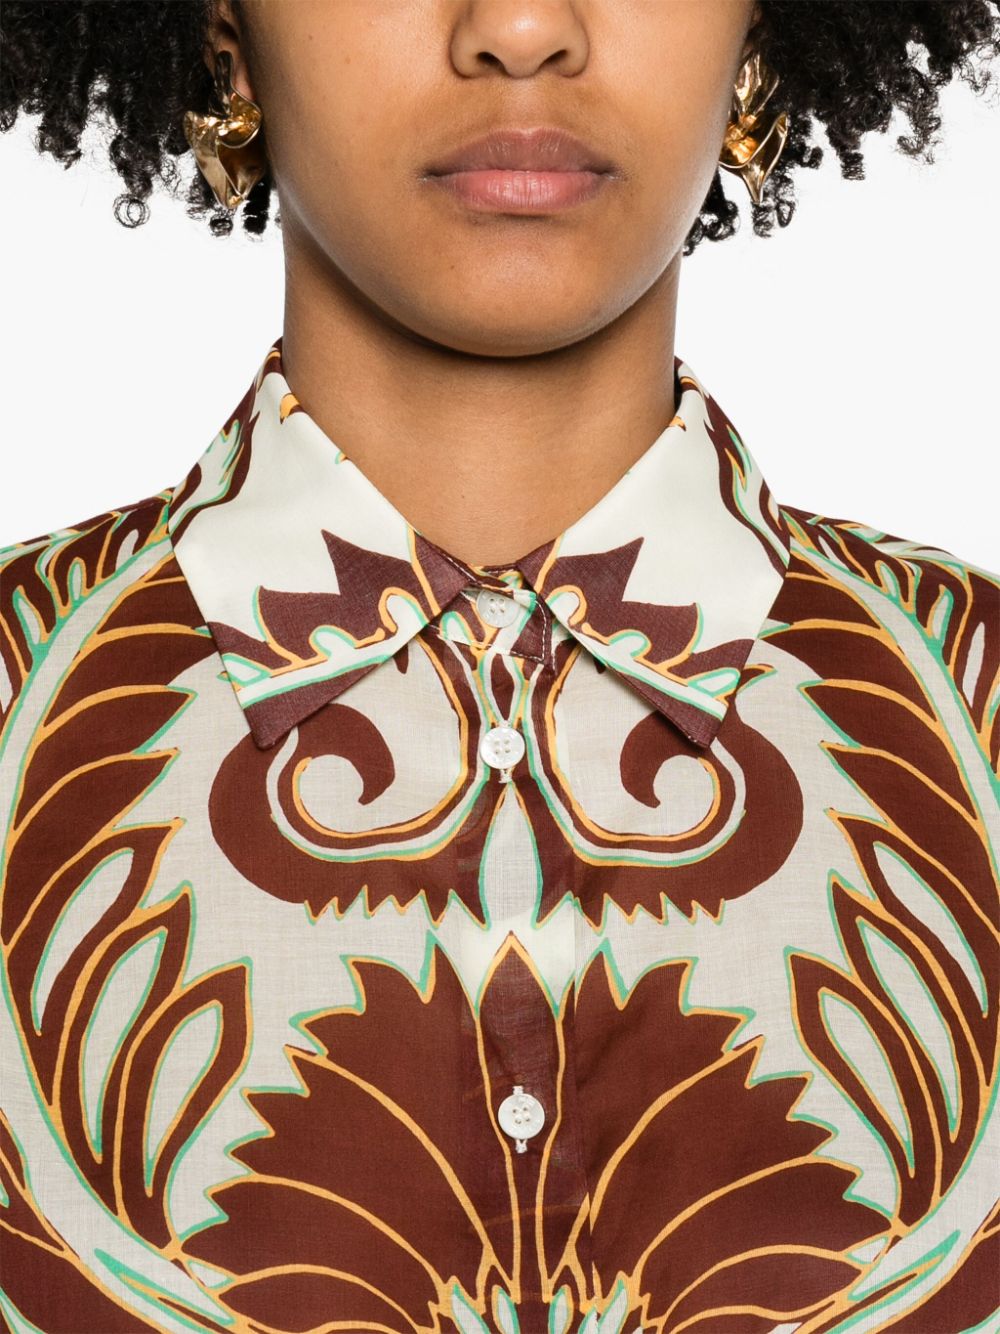 Abstract patterned shirt